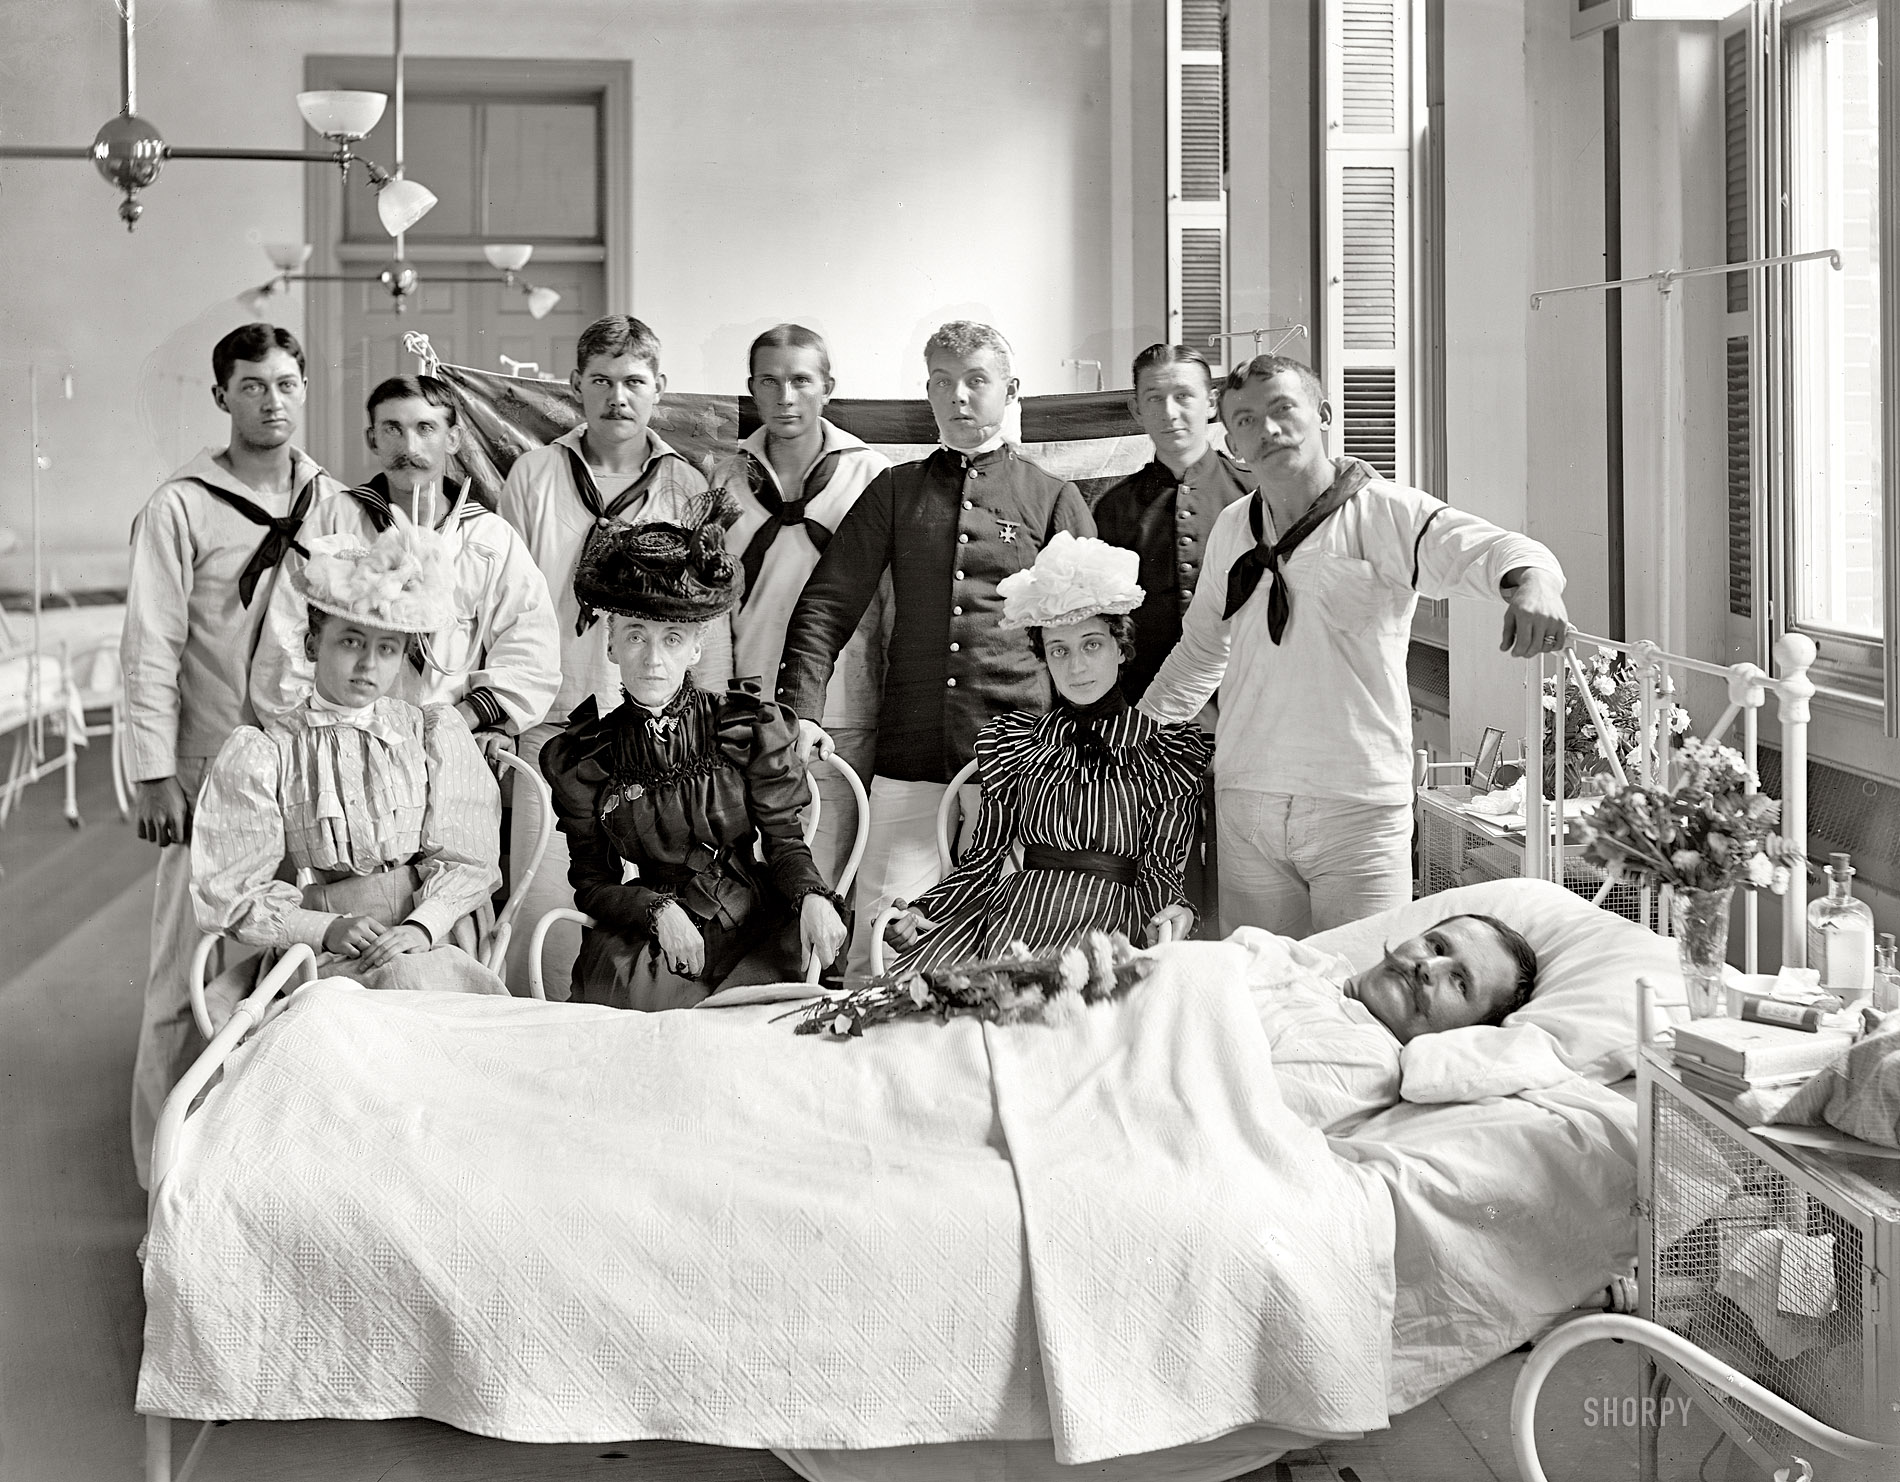 New York circa 1900. "Visiting a patient, Brooklyn Navy Yard hospital." 8x10 inch dry plate glass negative, Detroit Publishing Company. View full size.